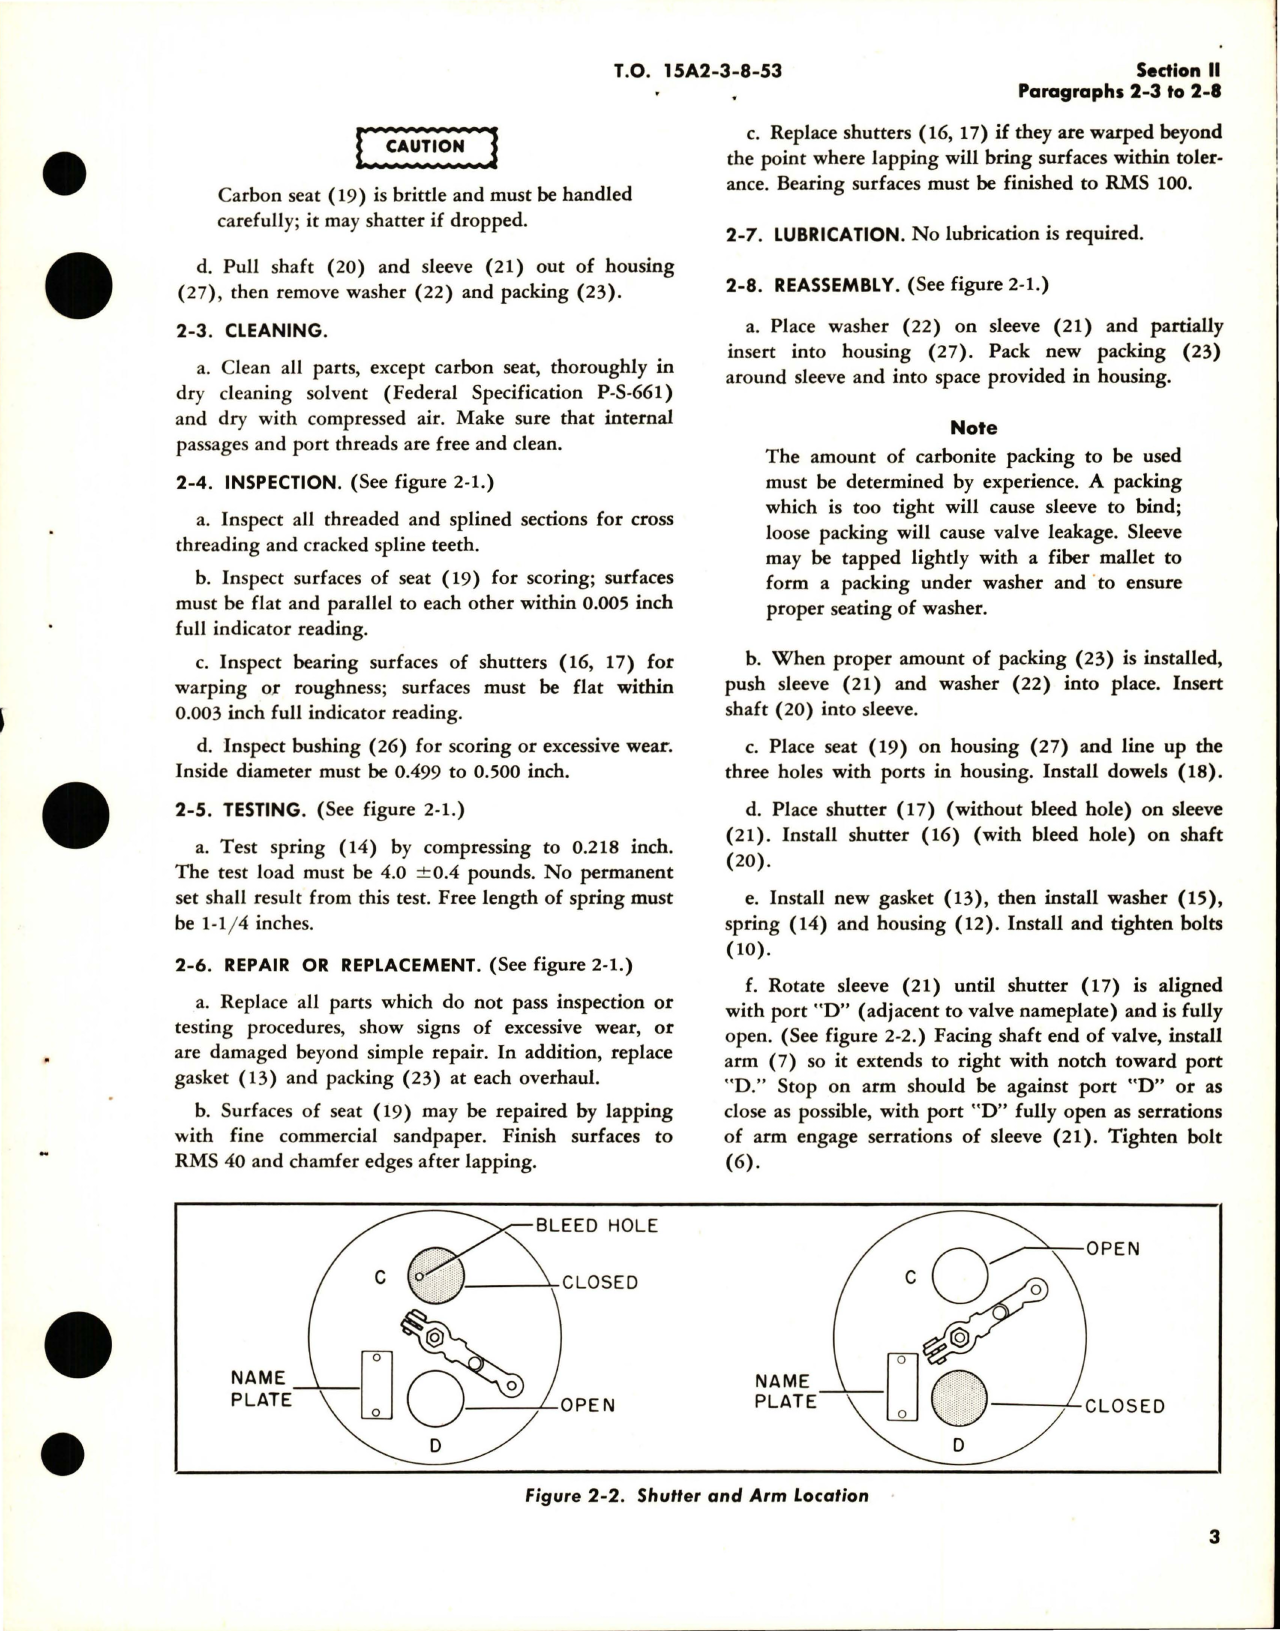 Sample page 5 from AirCorps Library document: Overhaul Instructions for Air Flow Control Valves & Shutoff Valves - Models SV7-2, SV7-3, and V7-1